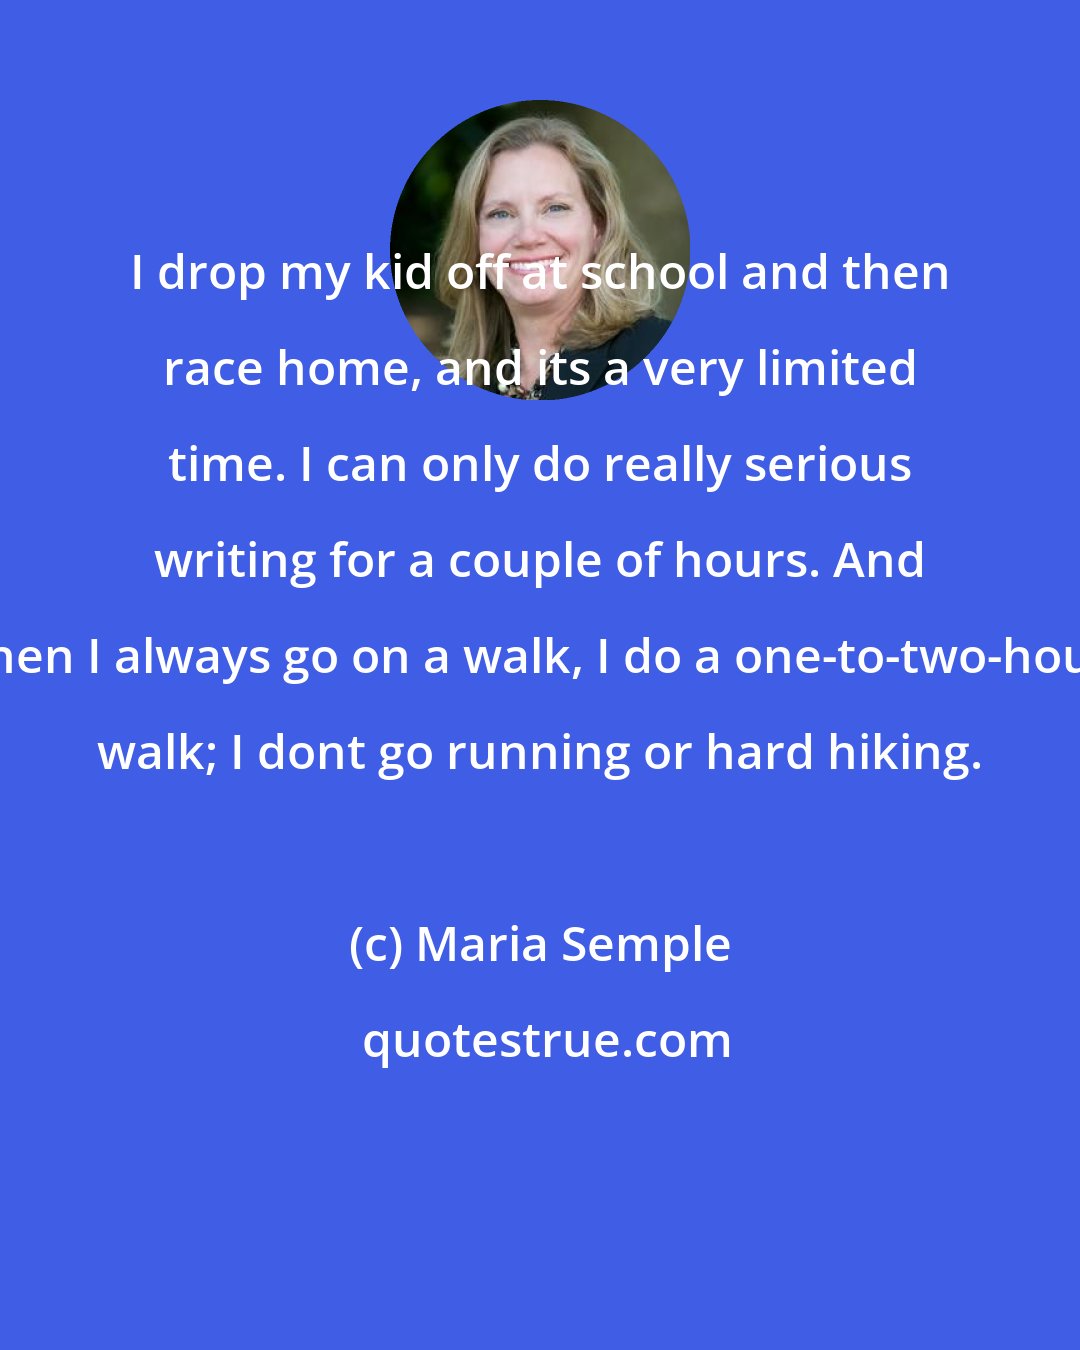 Maria Semple: I drop my kid off at school and then race home, and its a very limited time. I can only do really serious writing for a couple of hours. And then I always go on a walk, I do a one-to-two-hour walk; I dont go running or hard hiking.